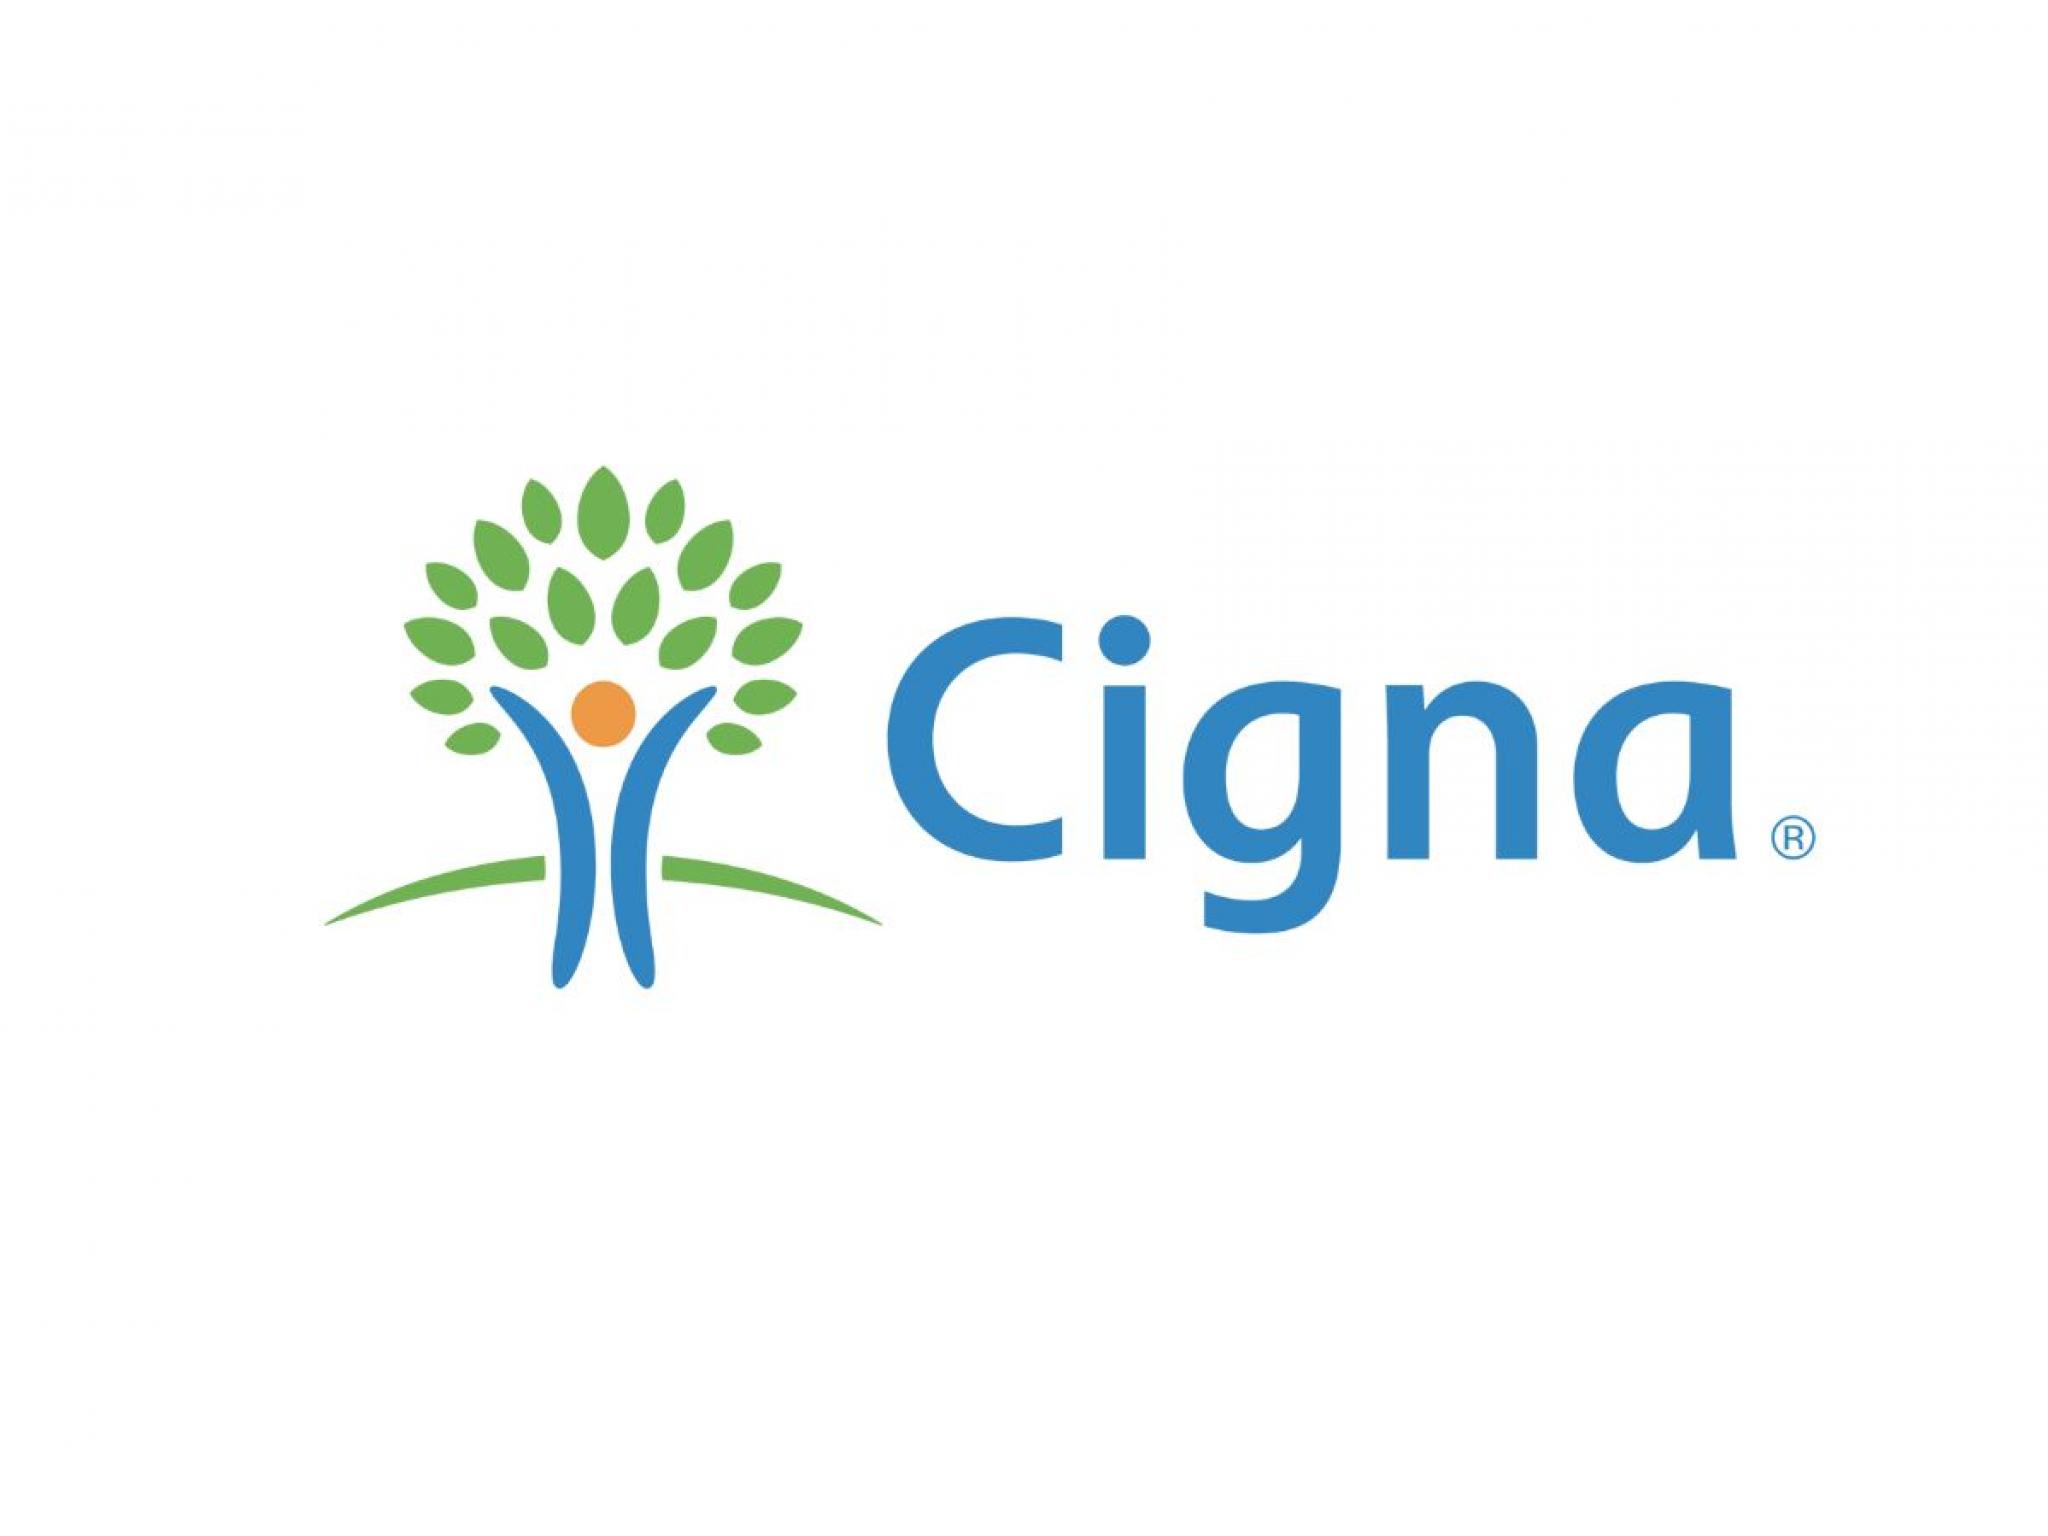  cigna-calls-off-humana-merger-joins-macys-snap-and-other-big-stocks-moving-higher-in-mondays-pre-market-session 